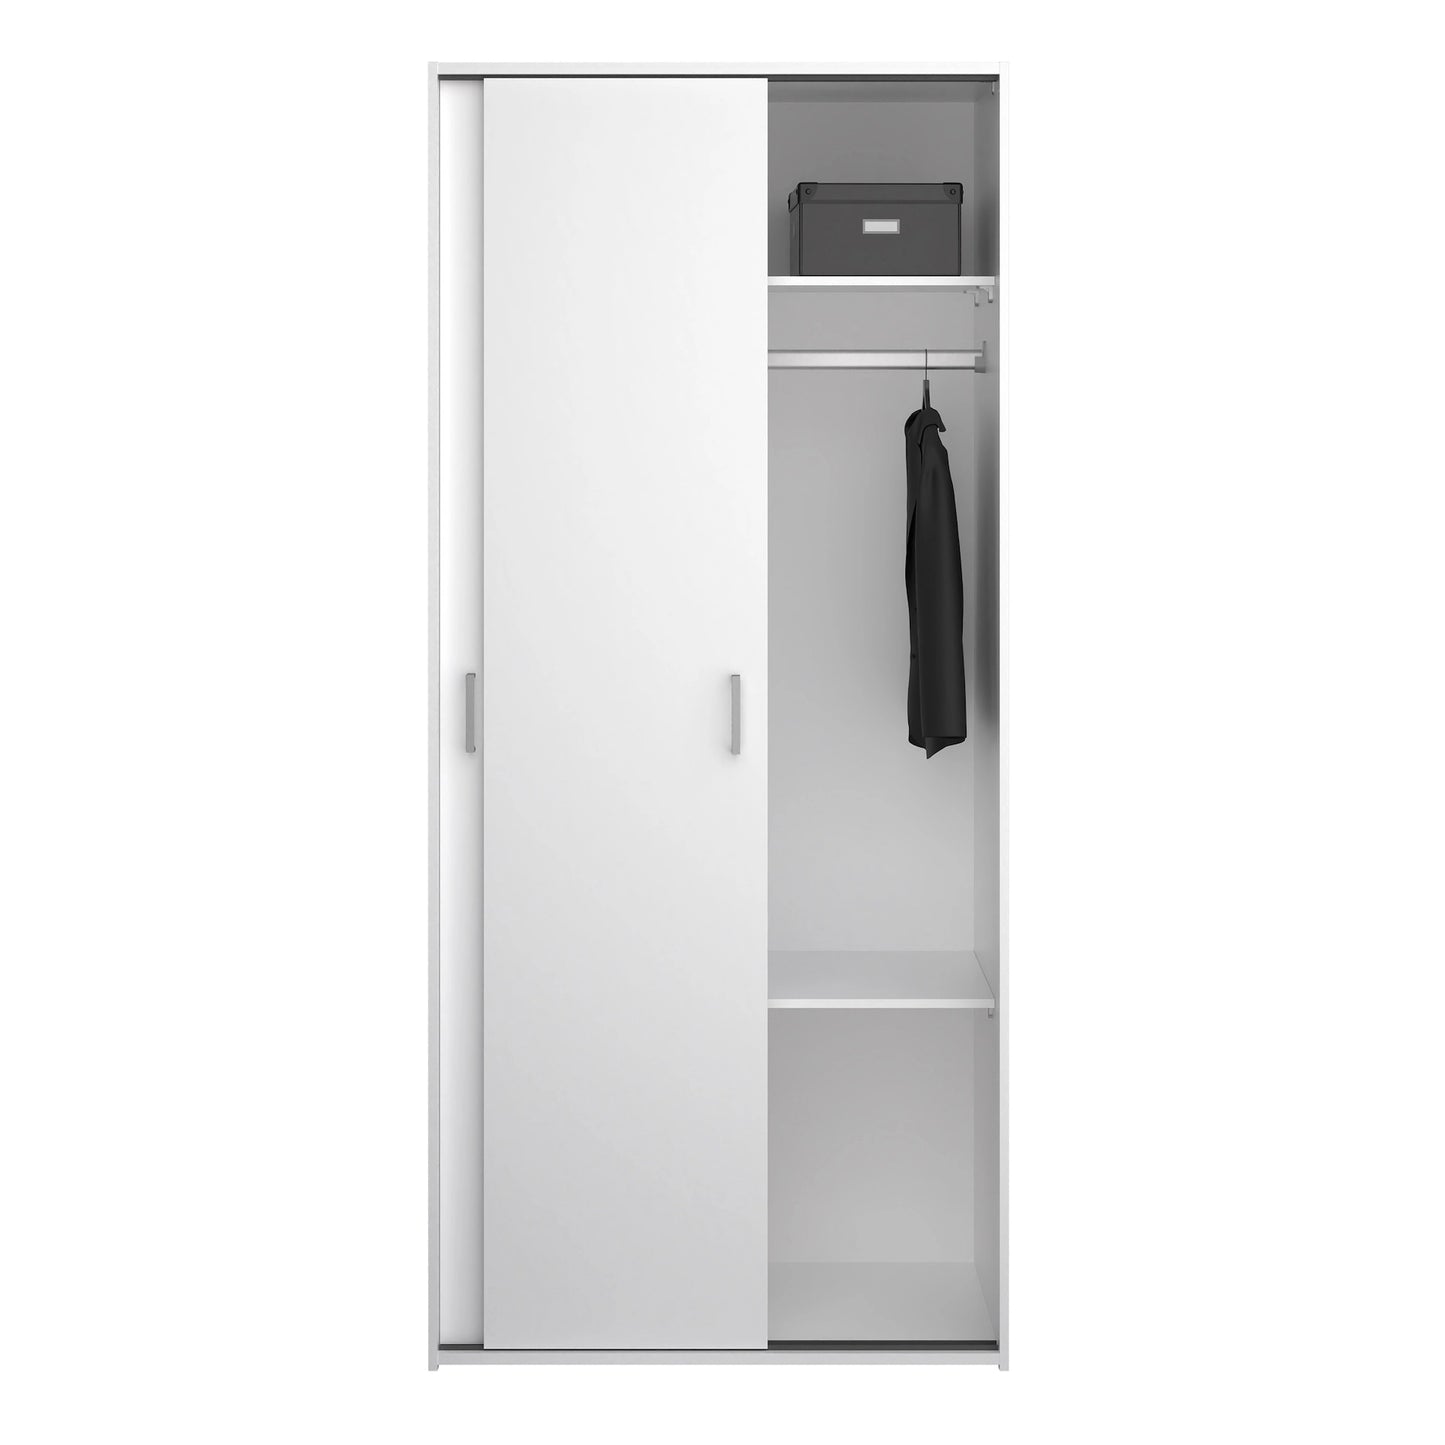 Furniture To Go Space Wardrobe with 2 Sliding Doors in White